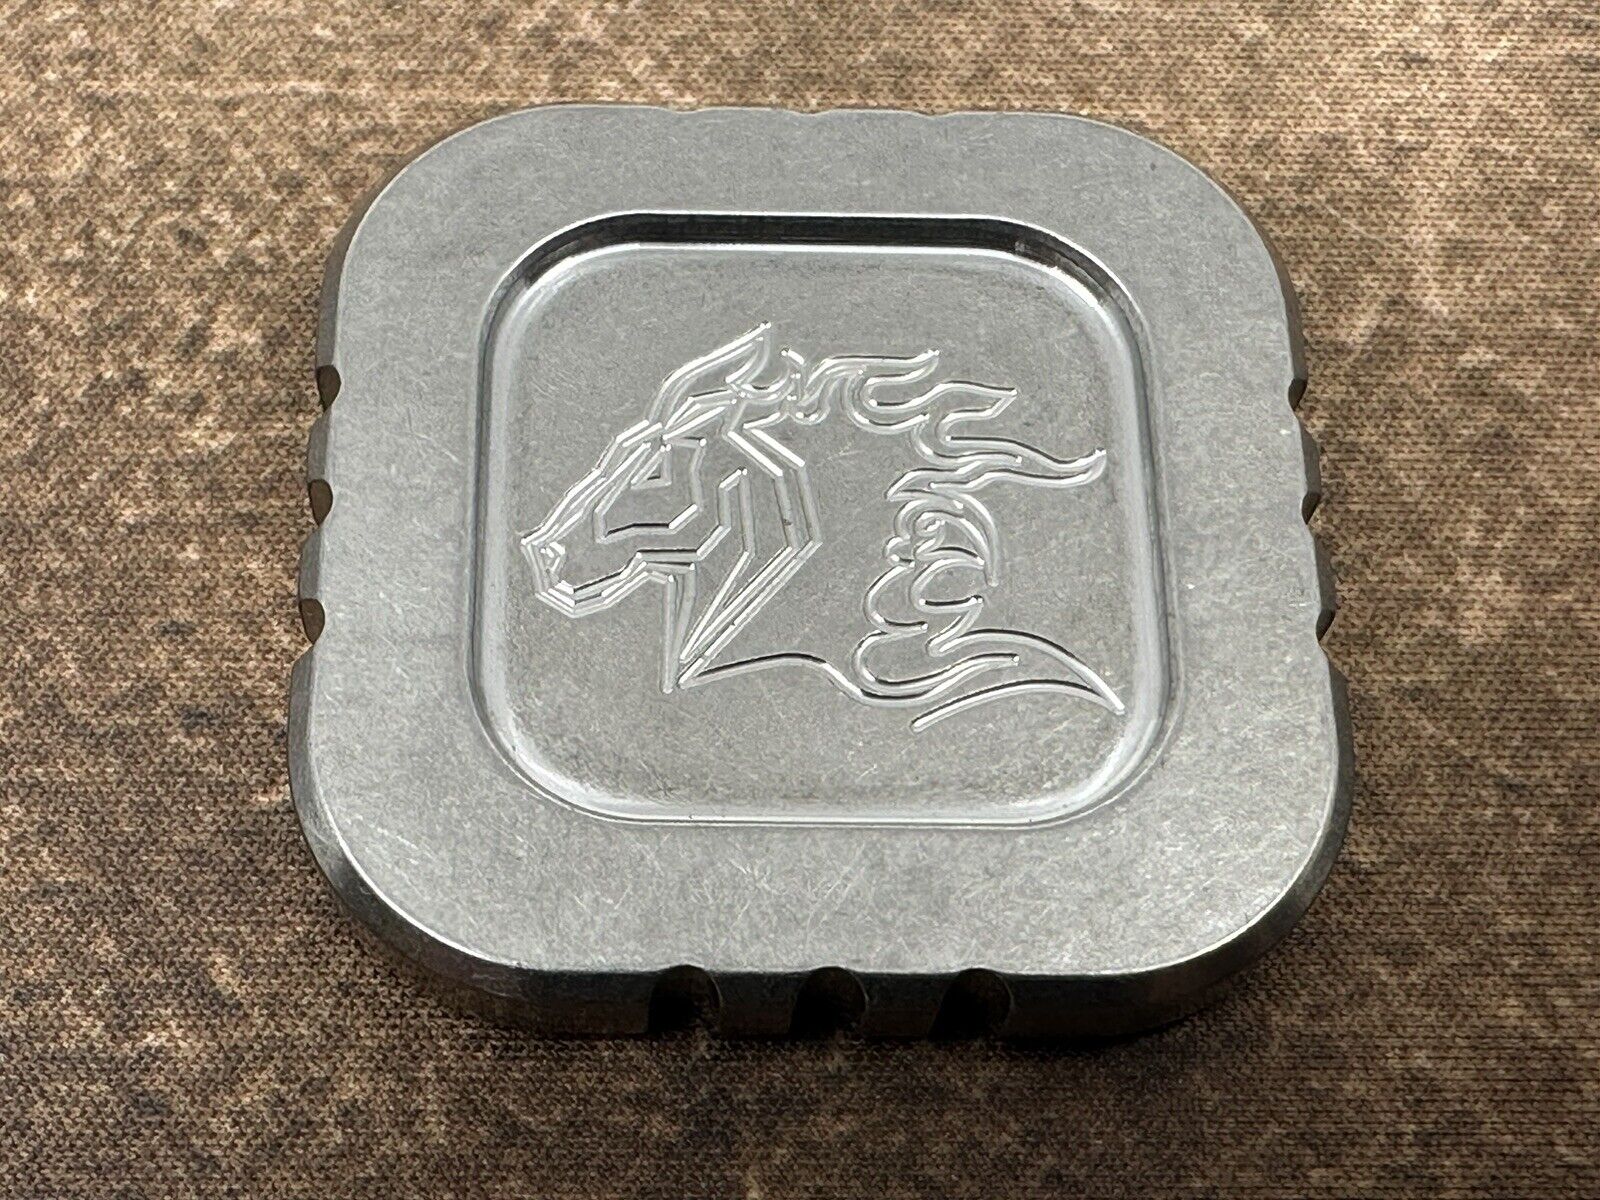 Brand New Hinderer Steel Flame Stone Wash Challenge Coin Filler Tab